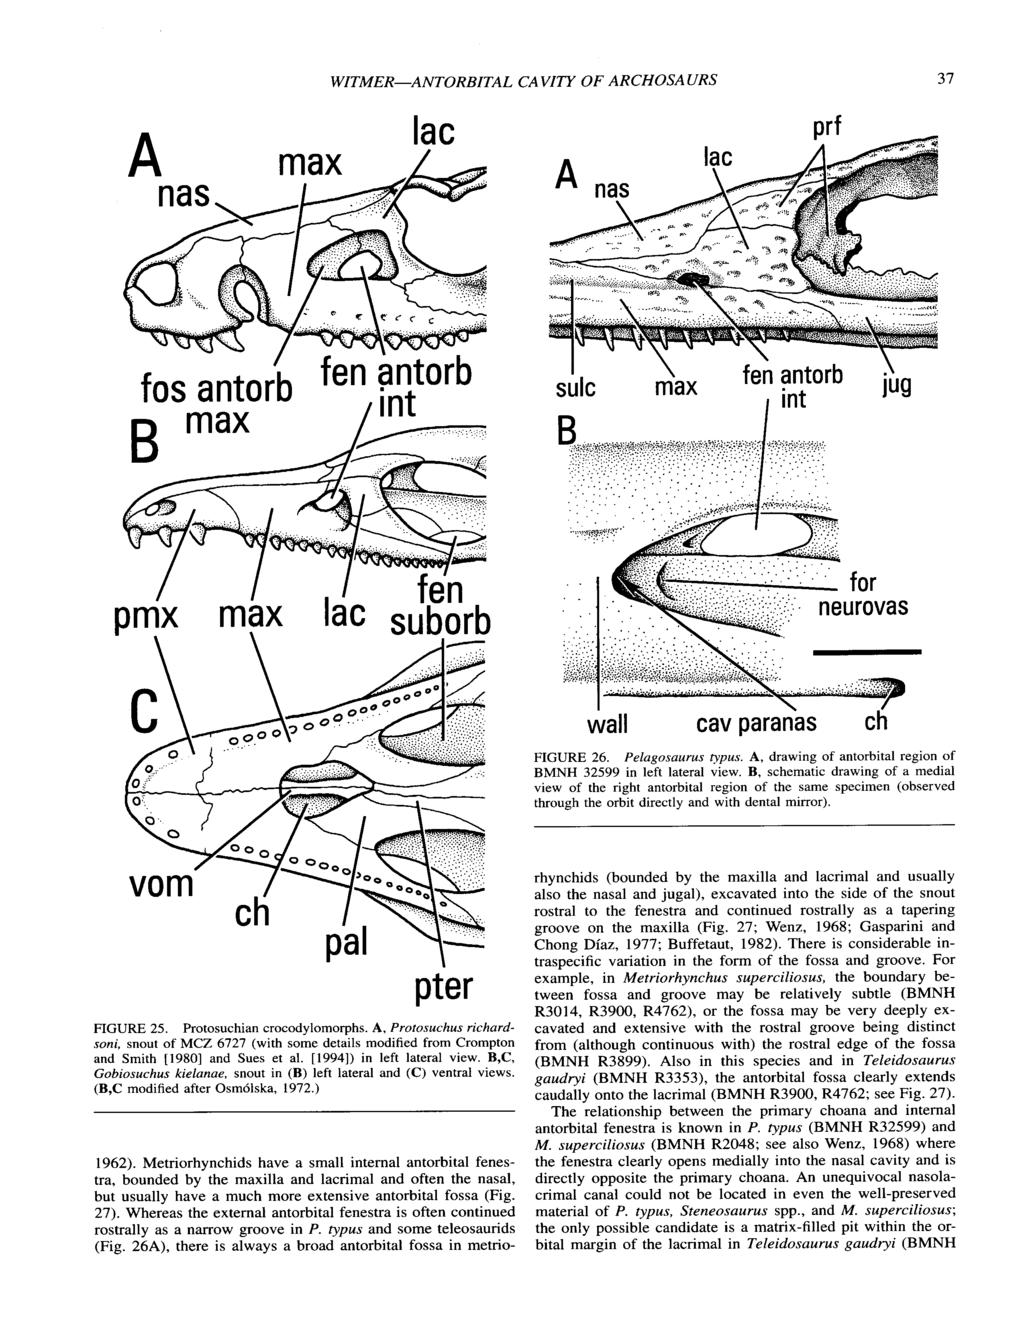 WITMER-ANTORBITAL CAVITY OF ARCHOSAURS 37 I \ sulc max fen antorb int Lg wall cav paraias ch FIGURE 26. Pelagosaurus typus. A, drawing of antorbital region of BMNH 32599 in left lateral view.